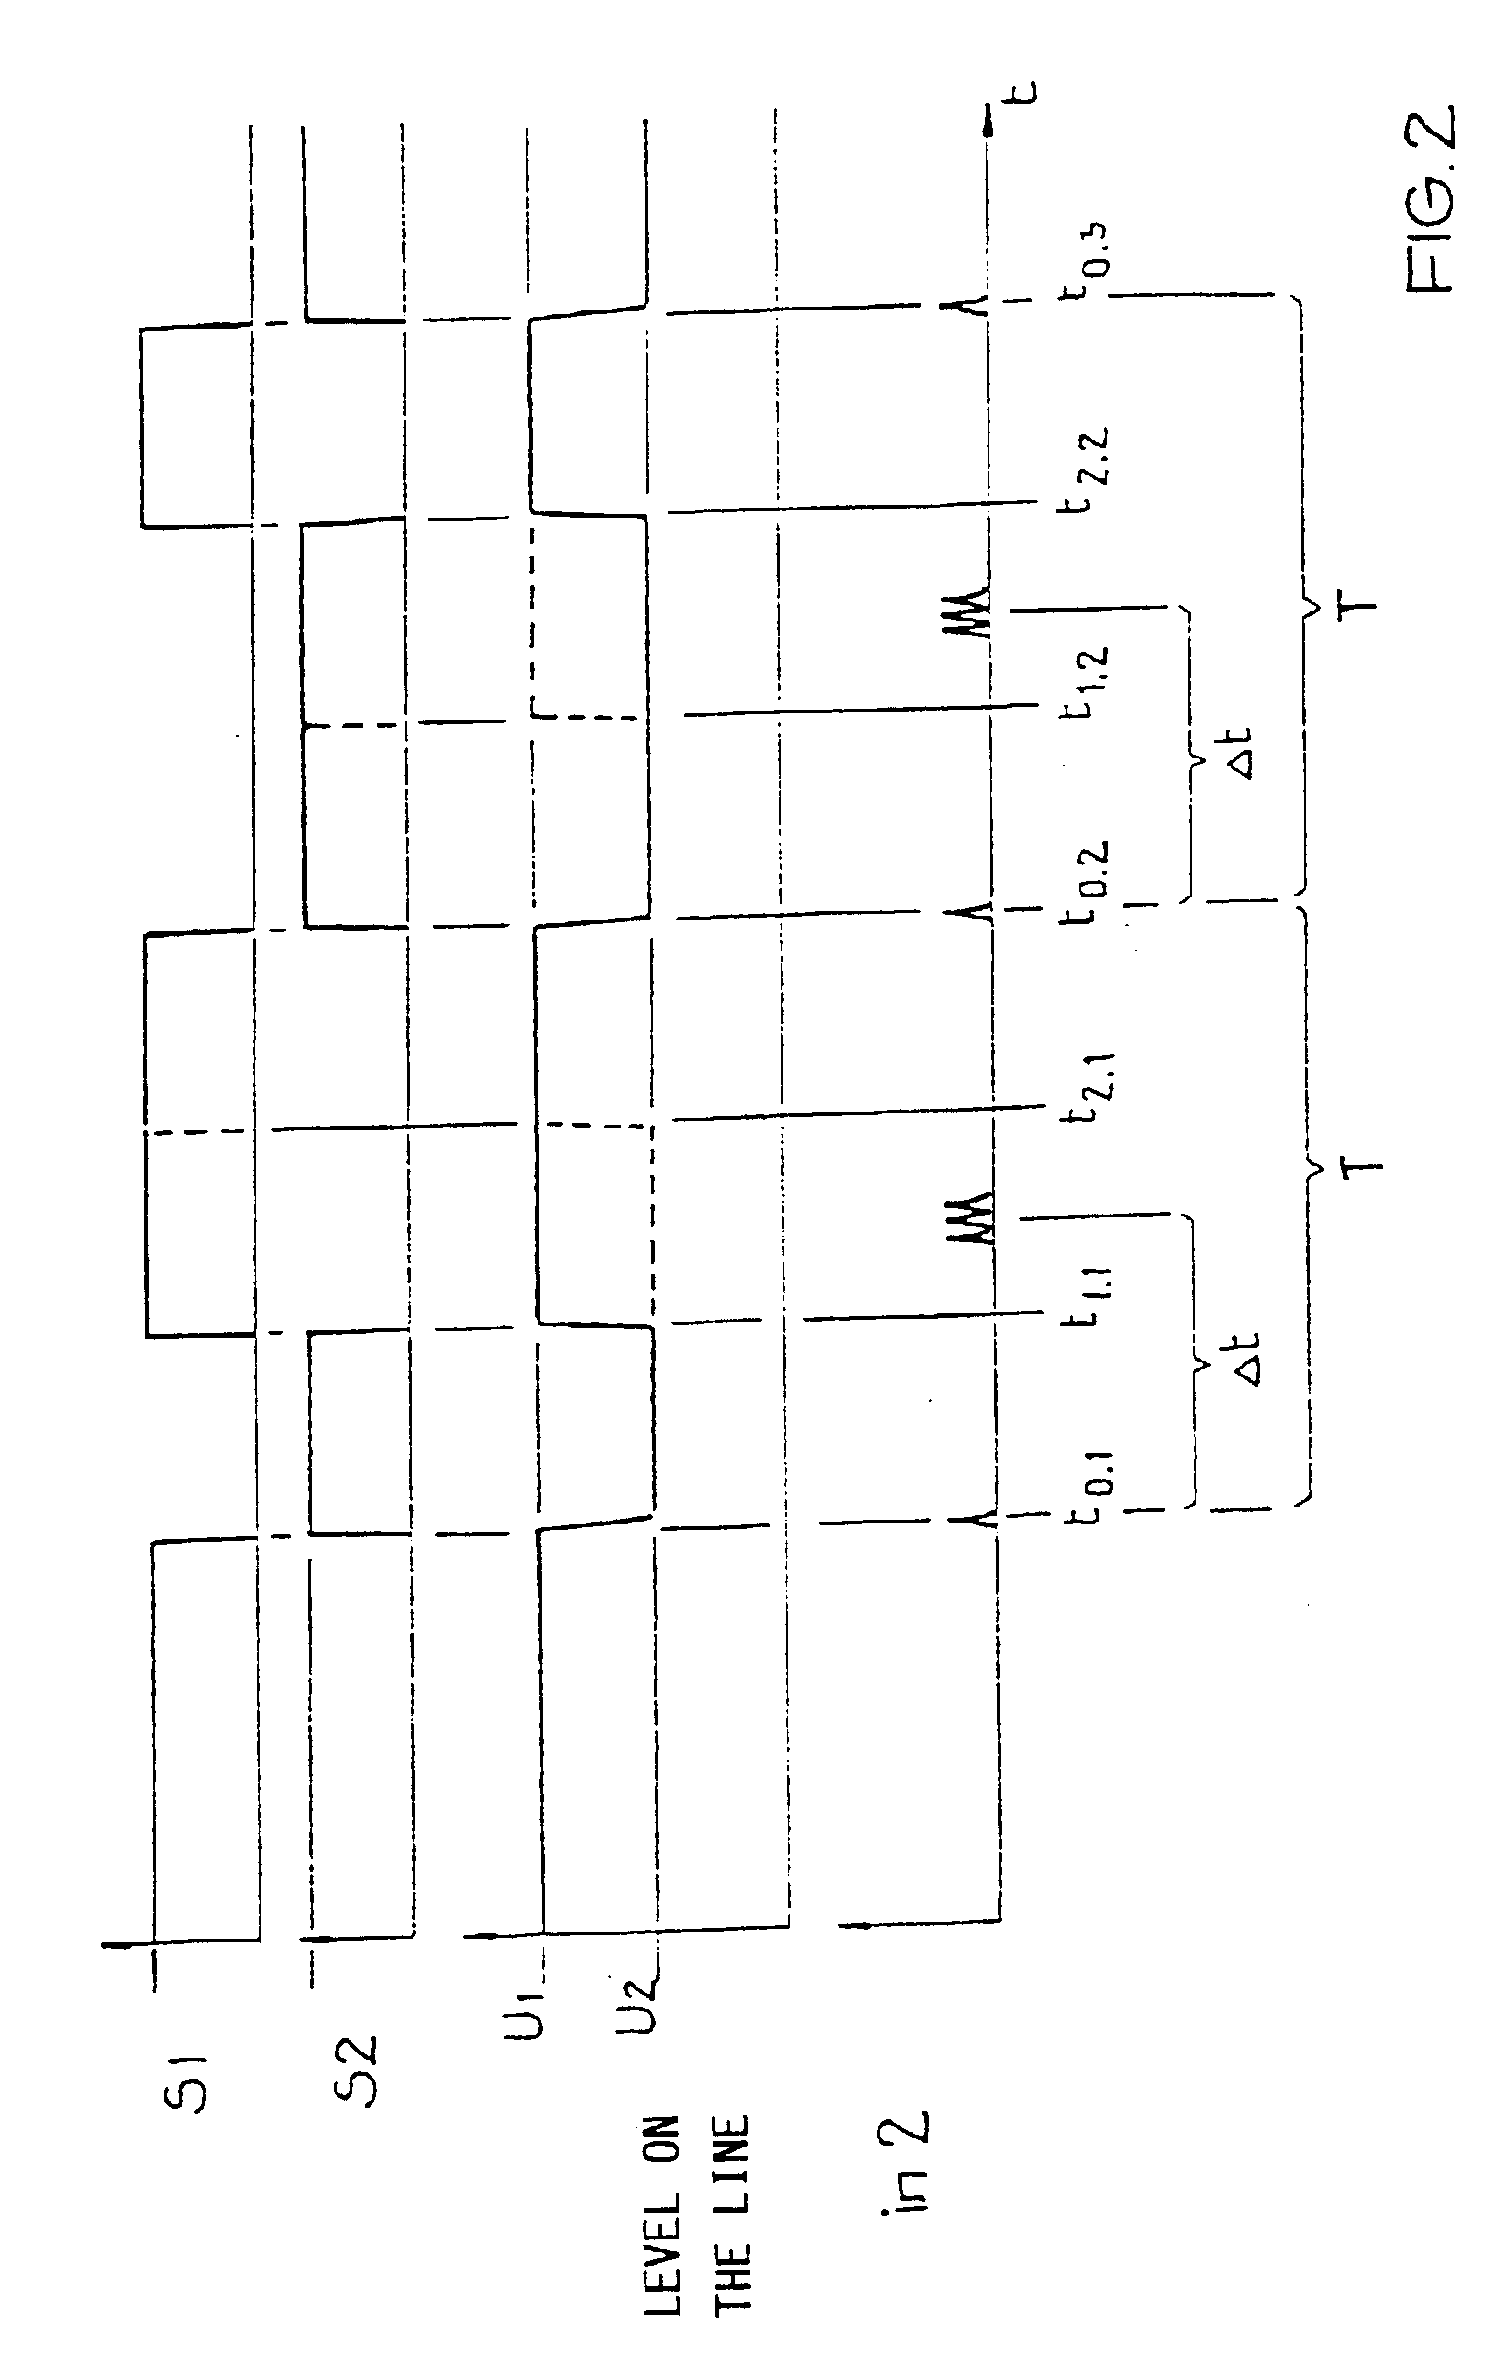 Method for the transmission of signals in a bus system, superposed on a direct supply voltage